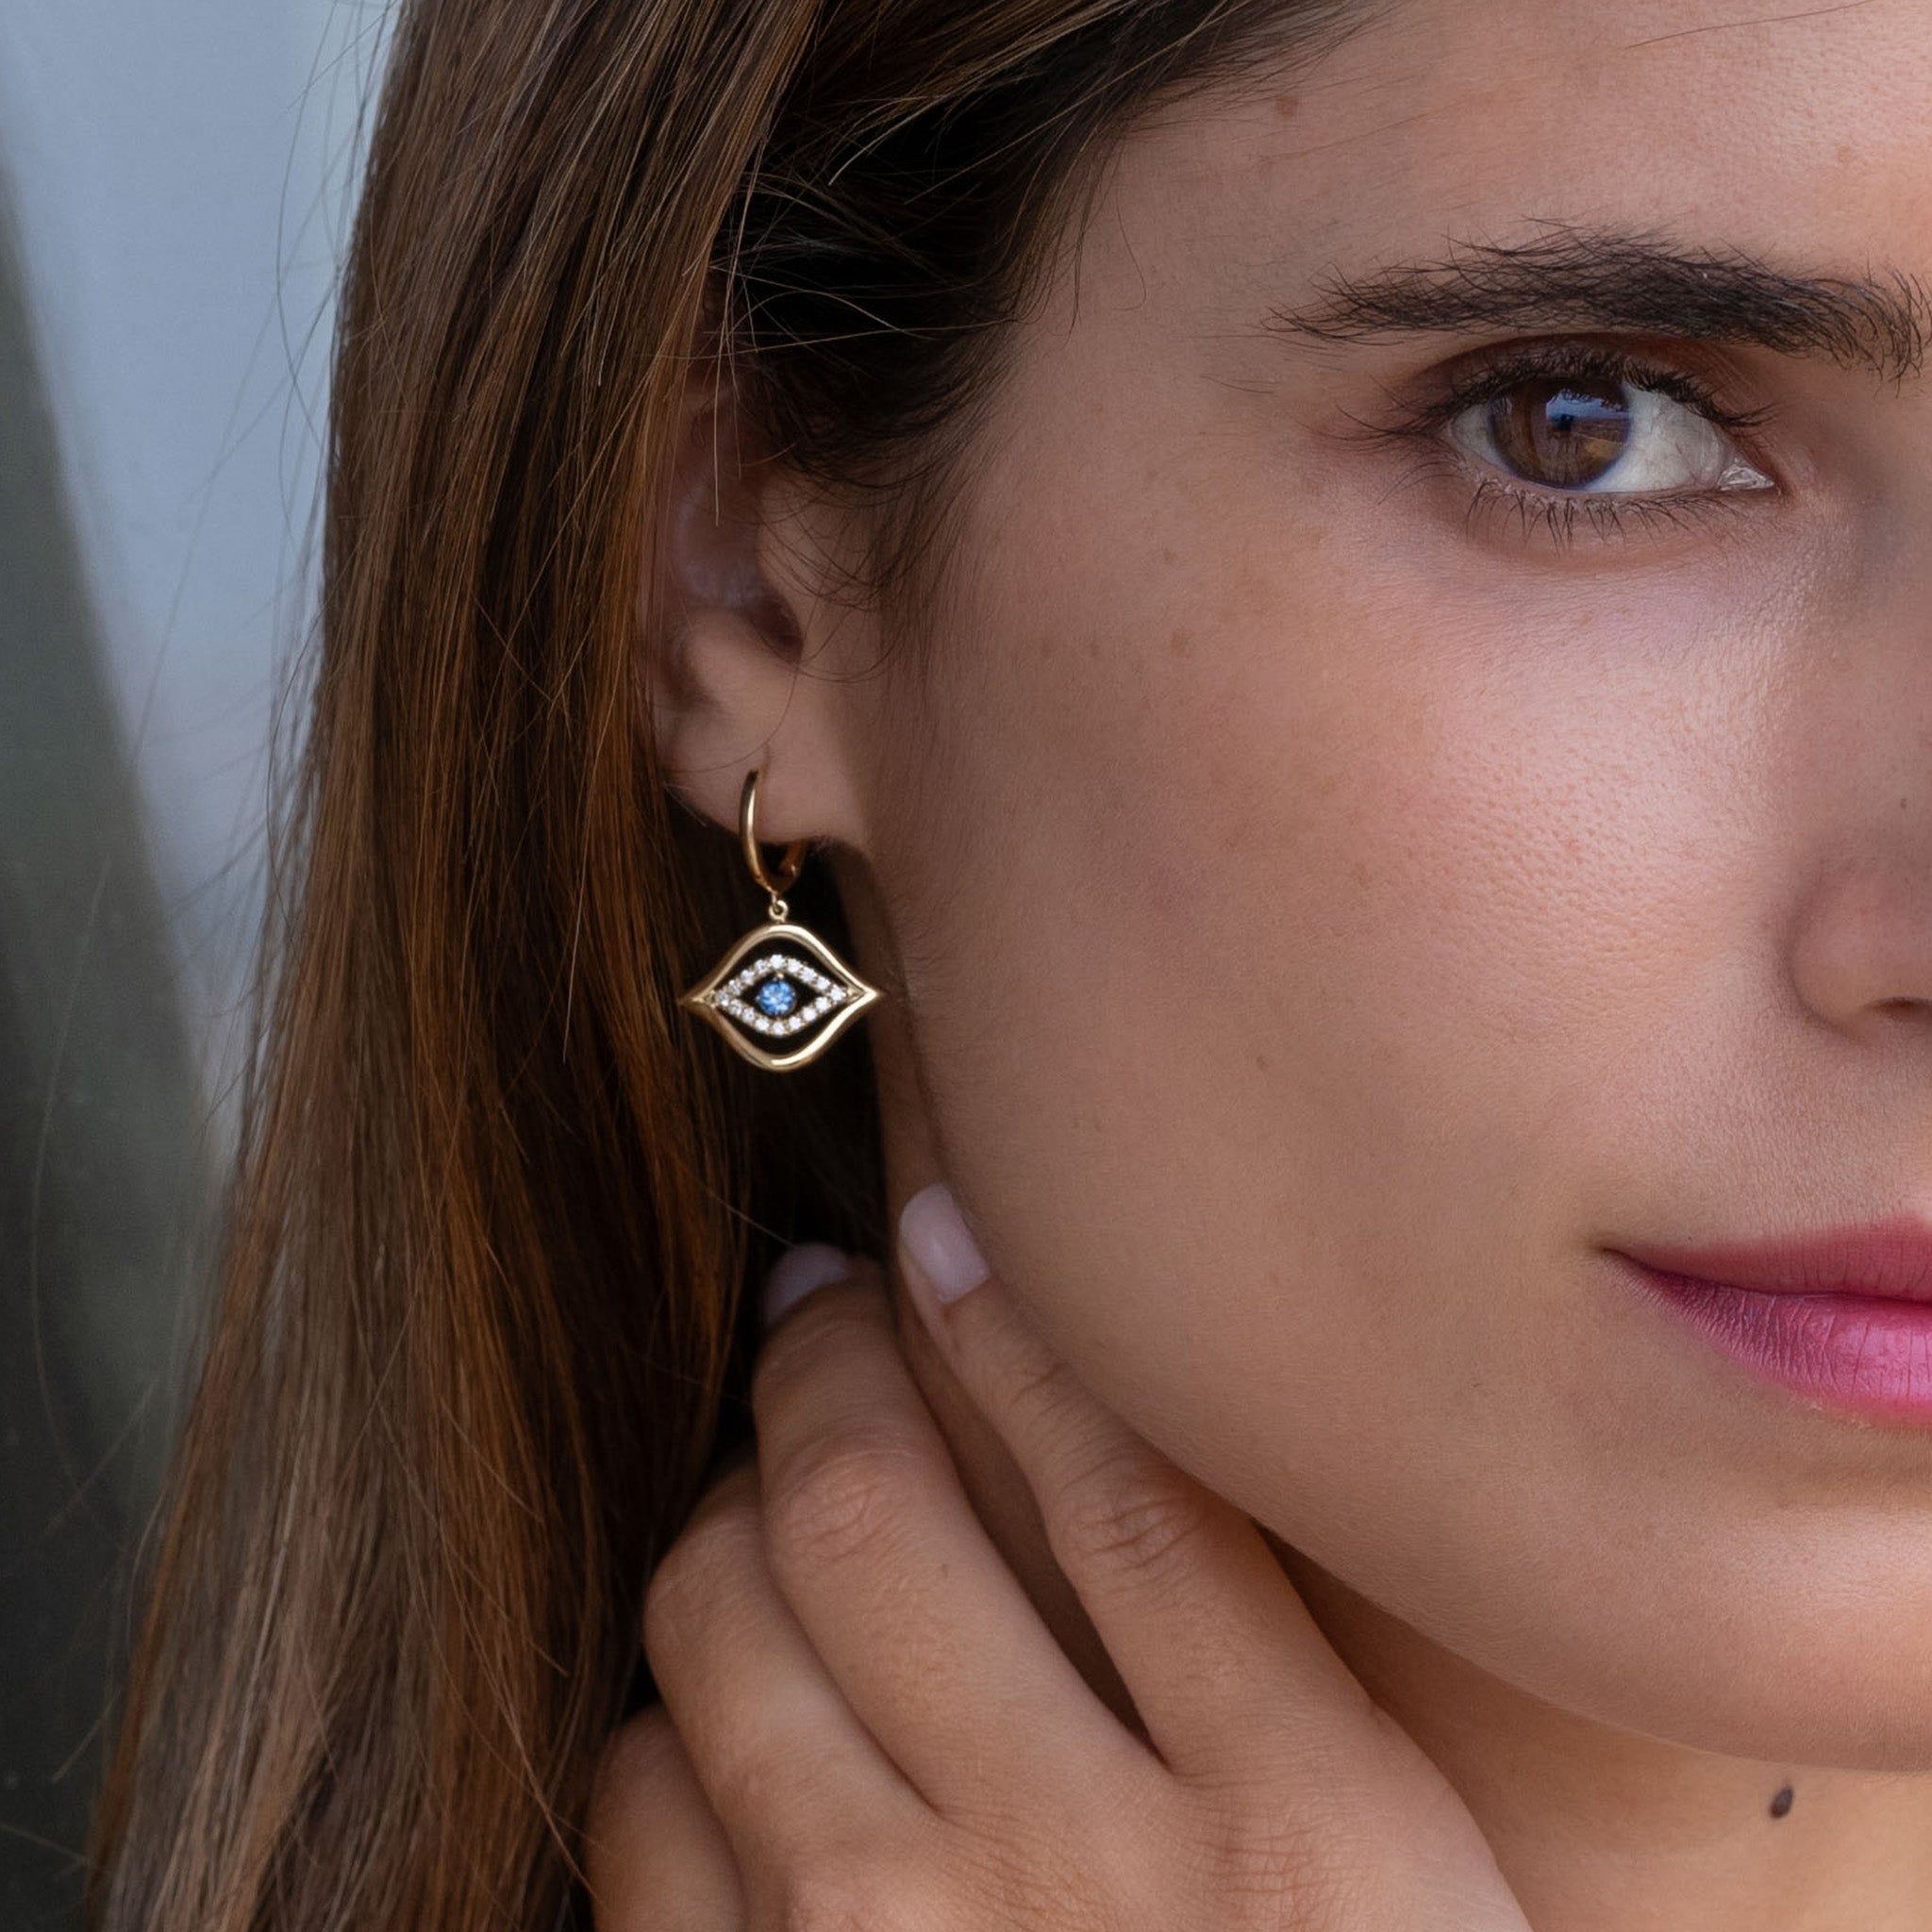 Exquisite fine jewellery featuring stunning diamond and sapphire earrings on model.